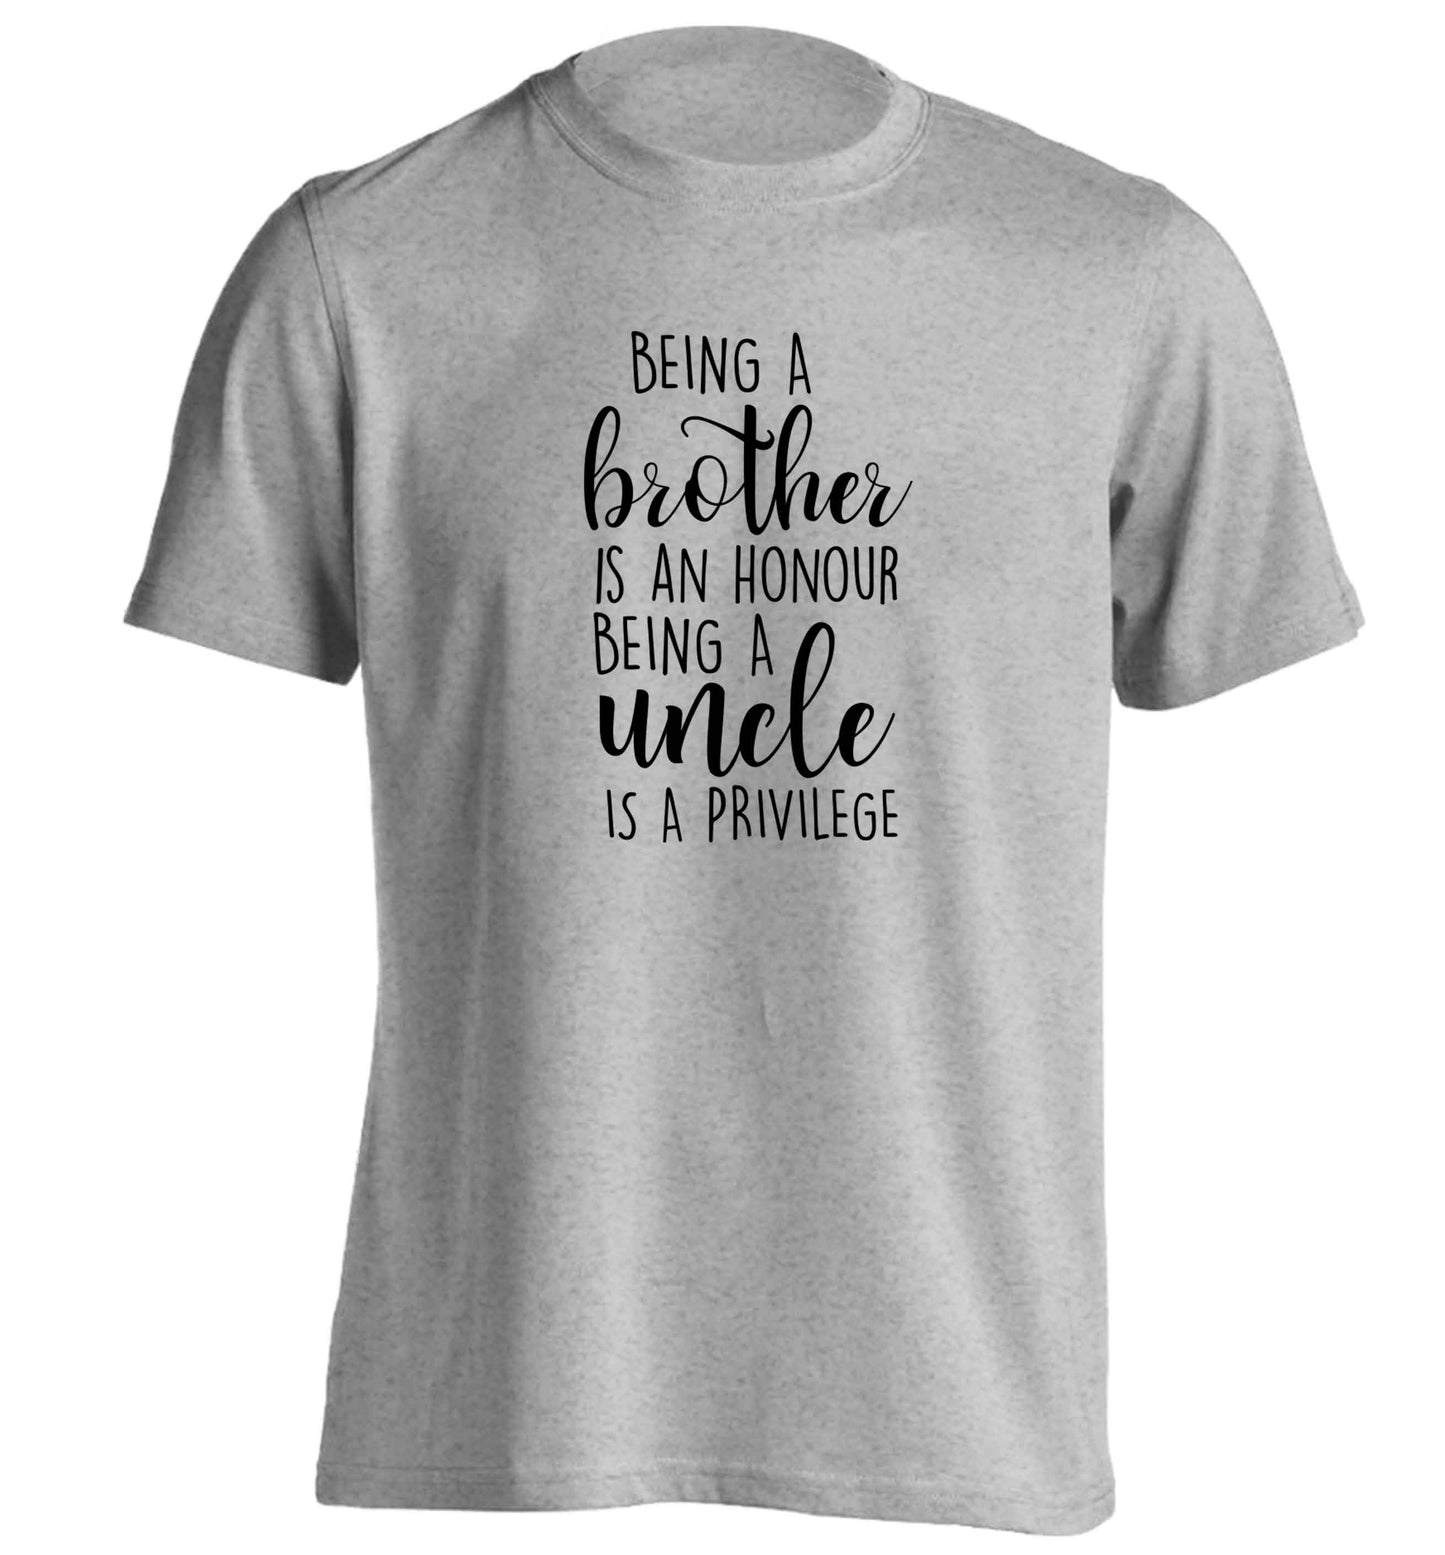 Being a brother is an honour being an uncle is a privilege adults unisex grey Tshirt 2XL